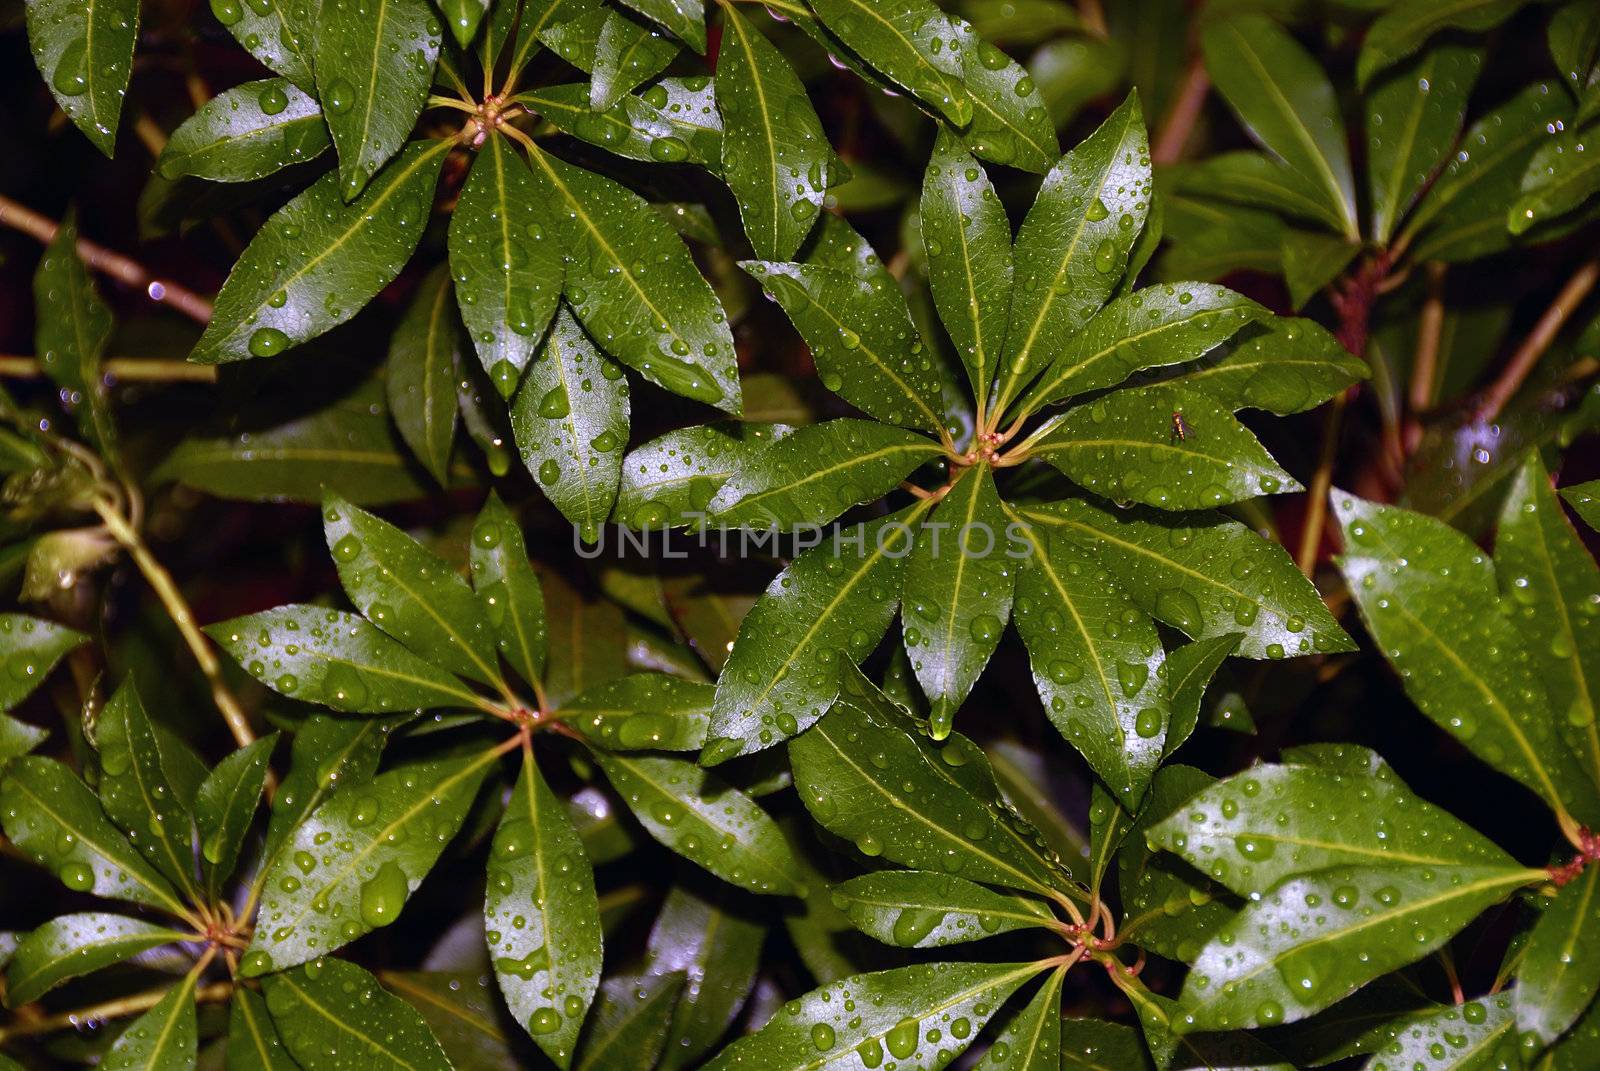 Leaves with water droplets after a heavy down pour